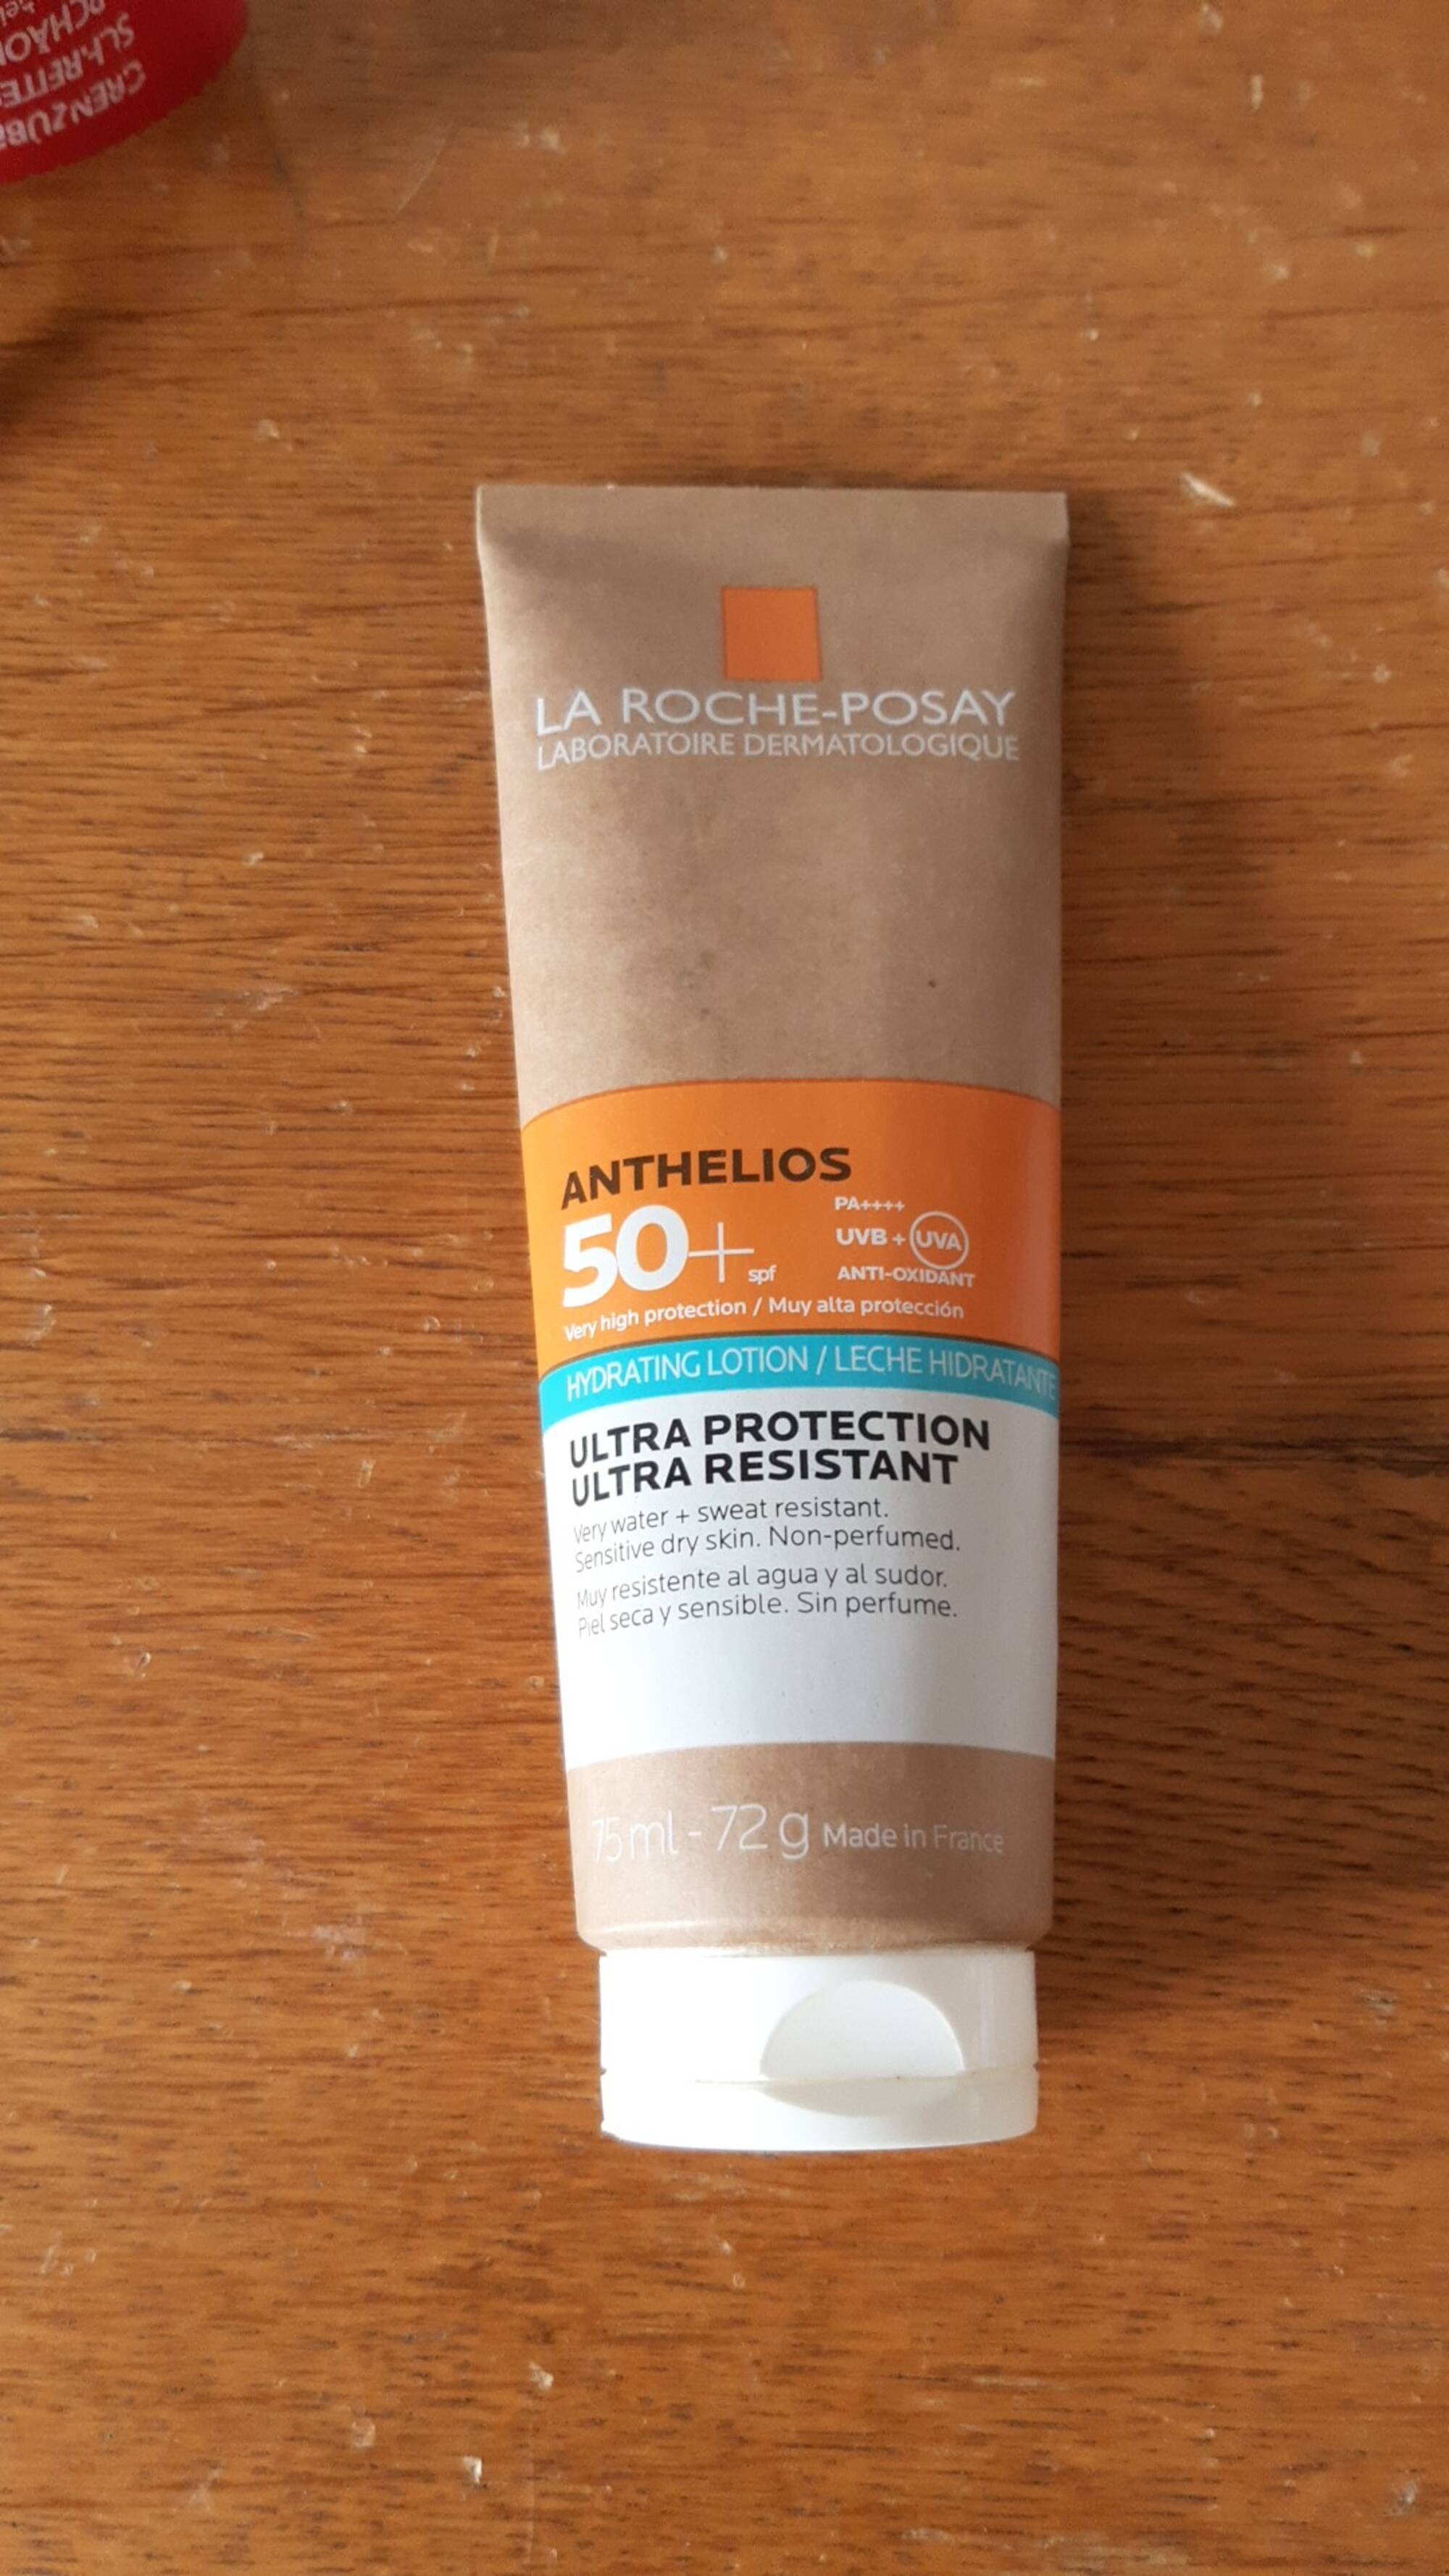 LA ROCHE-POSAY - Anthelios - Hydrating lotion SPF 50+